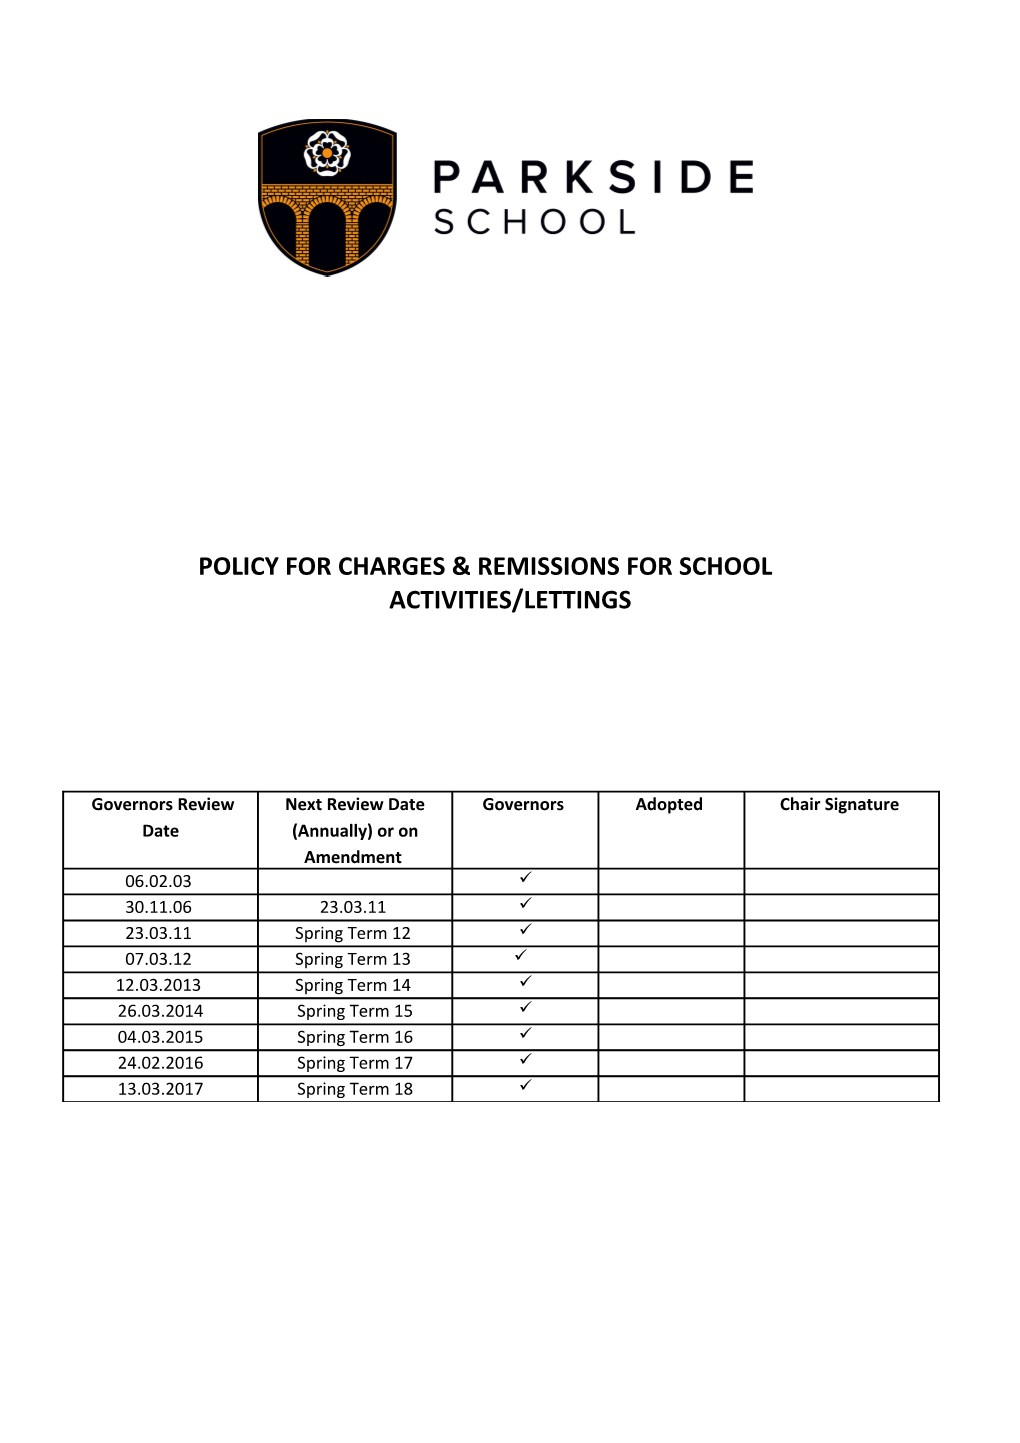 Parkside Policy for Charges & Remissions for School Activities/Lettings